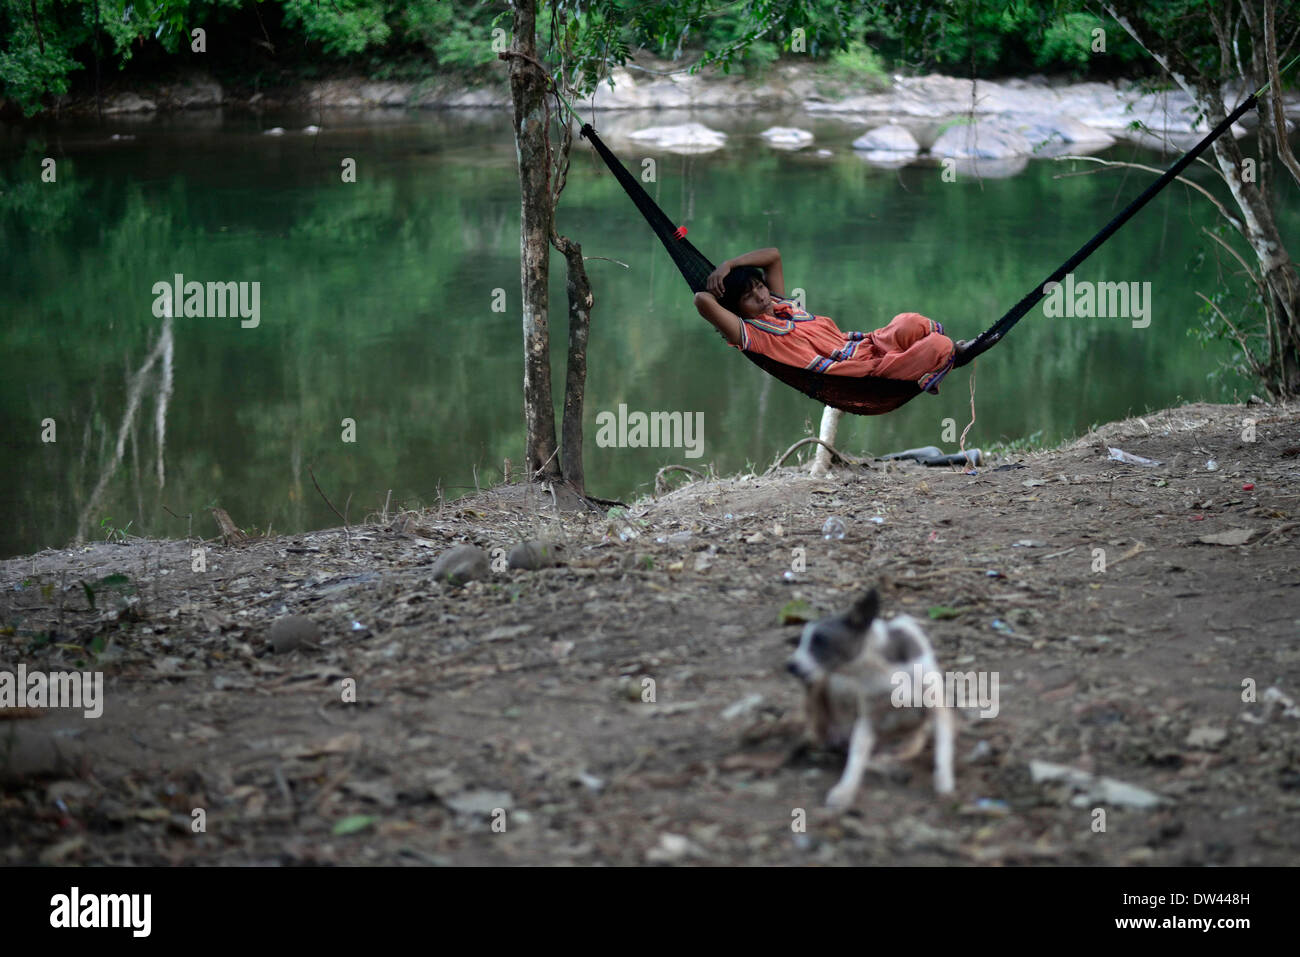 (140227) -- NGABE BUGLE REGION, Feb. 27, 2014 (Xinhua) -- A woman of the Ngabe Bugle ethnic group rests in a camp near the Tabasara river bank in the Ngabe Bugle indigenous region, 450 km west of Panama City, capital of Panama, on Feb. 24, 2014. The Ngabe Bugle indigenous region is located in the western region of Panama, and covers an area of 6,968 square km, with 91 per cent of its population living in extreme poverty. Native leaders of the Ngabe Bugle region declared a 'national alert', because of the eviction notice issued by a company which is developing the hydro-electric project 'Barro Stock Photo